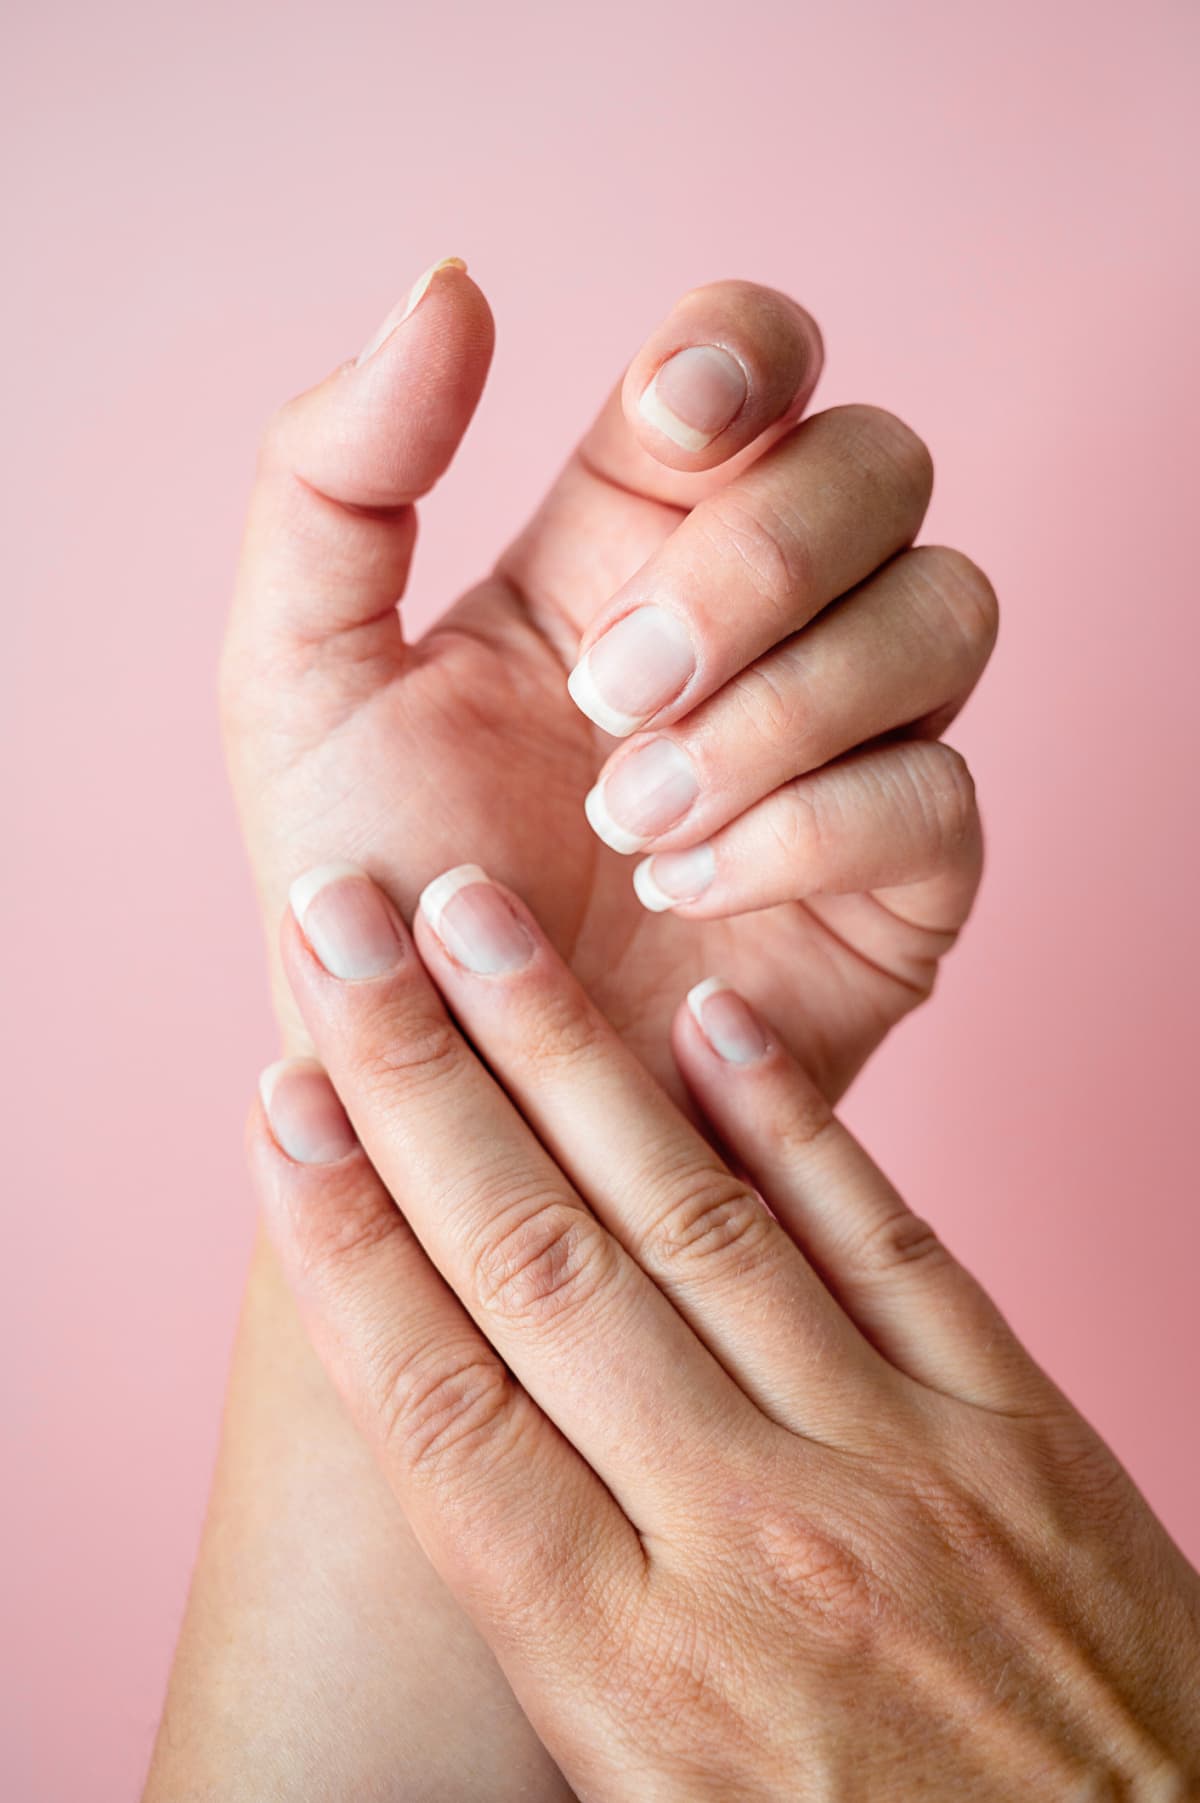 Female hand with natural healthy nails. Pink background.